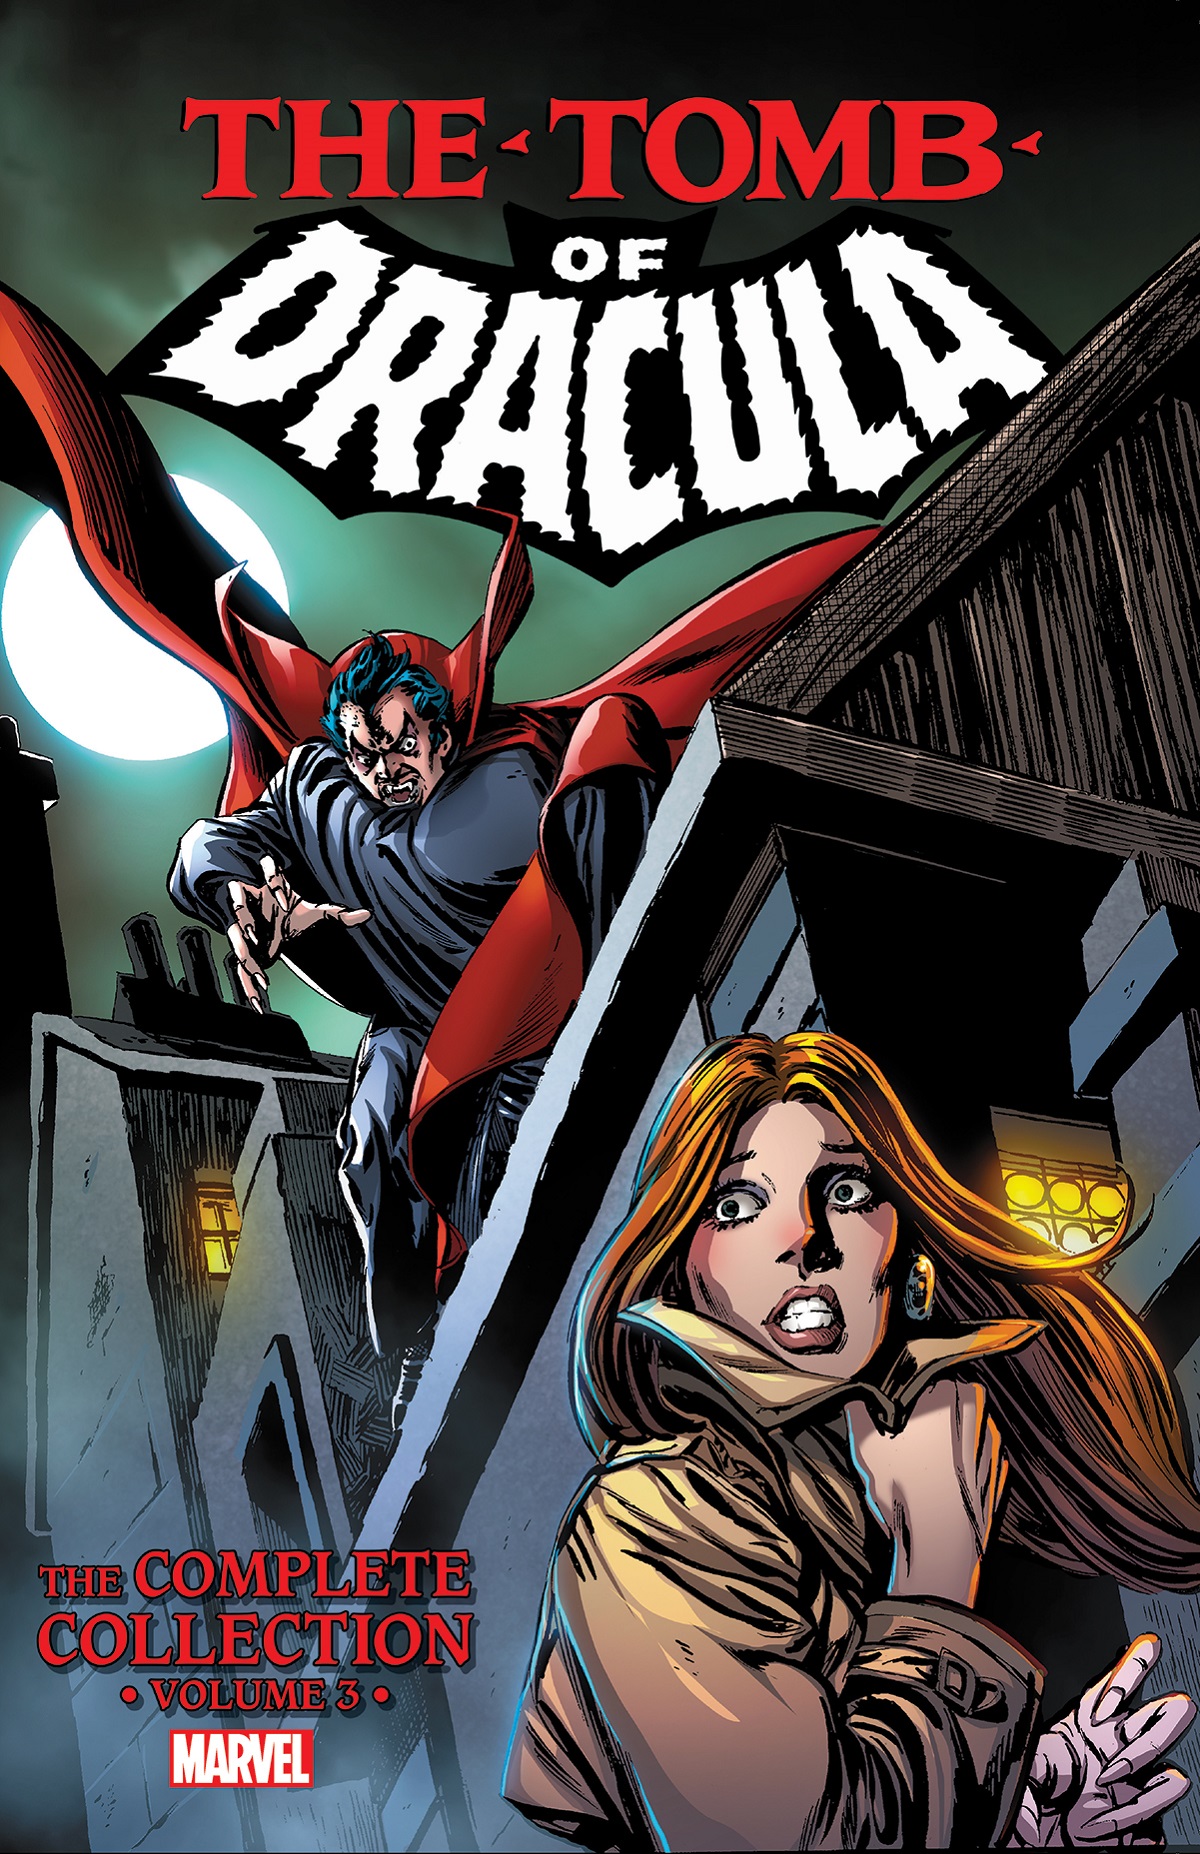 Tomb Of Dracula: The Complete Collection Vol. 3 (Trade Paperback)